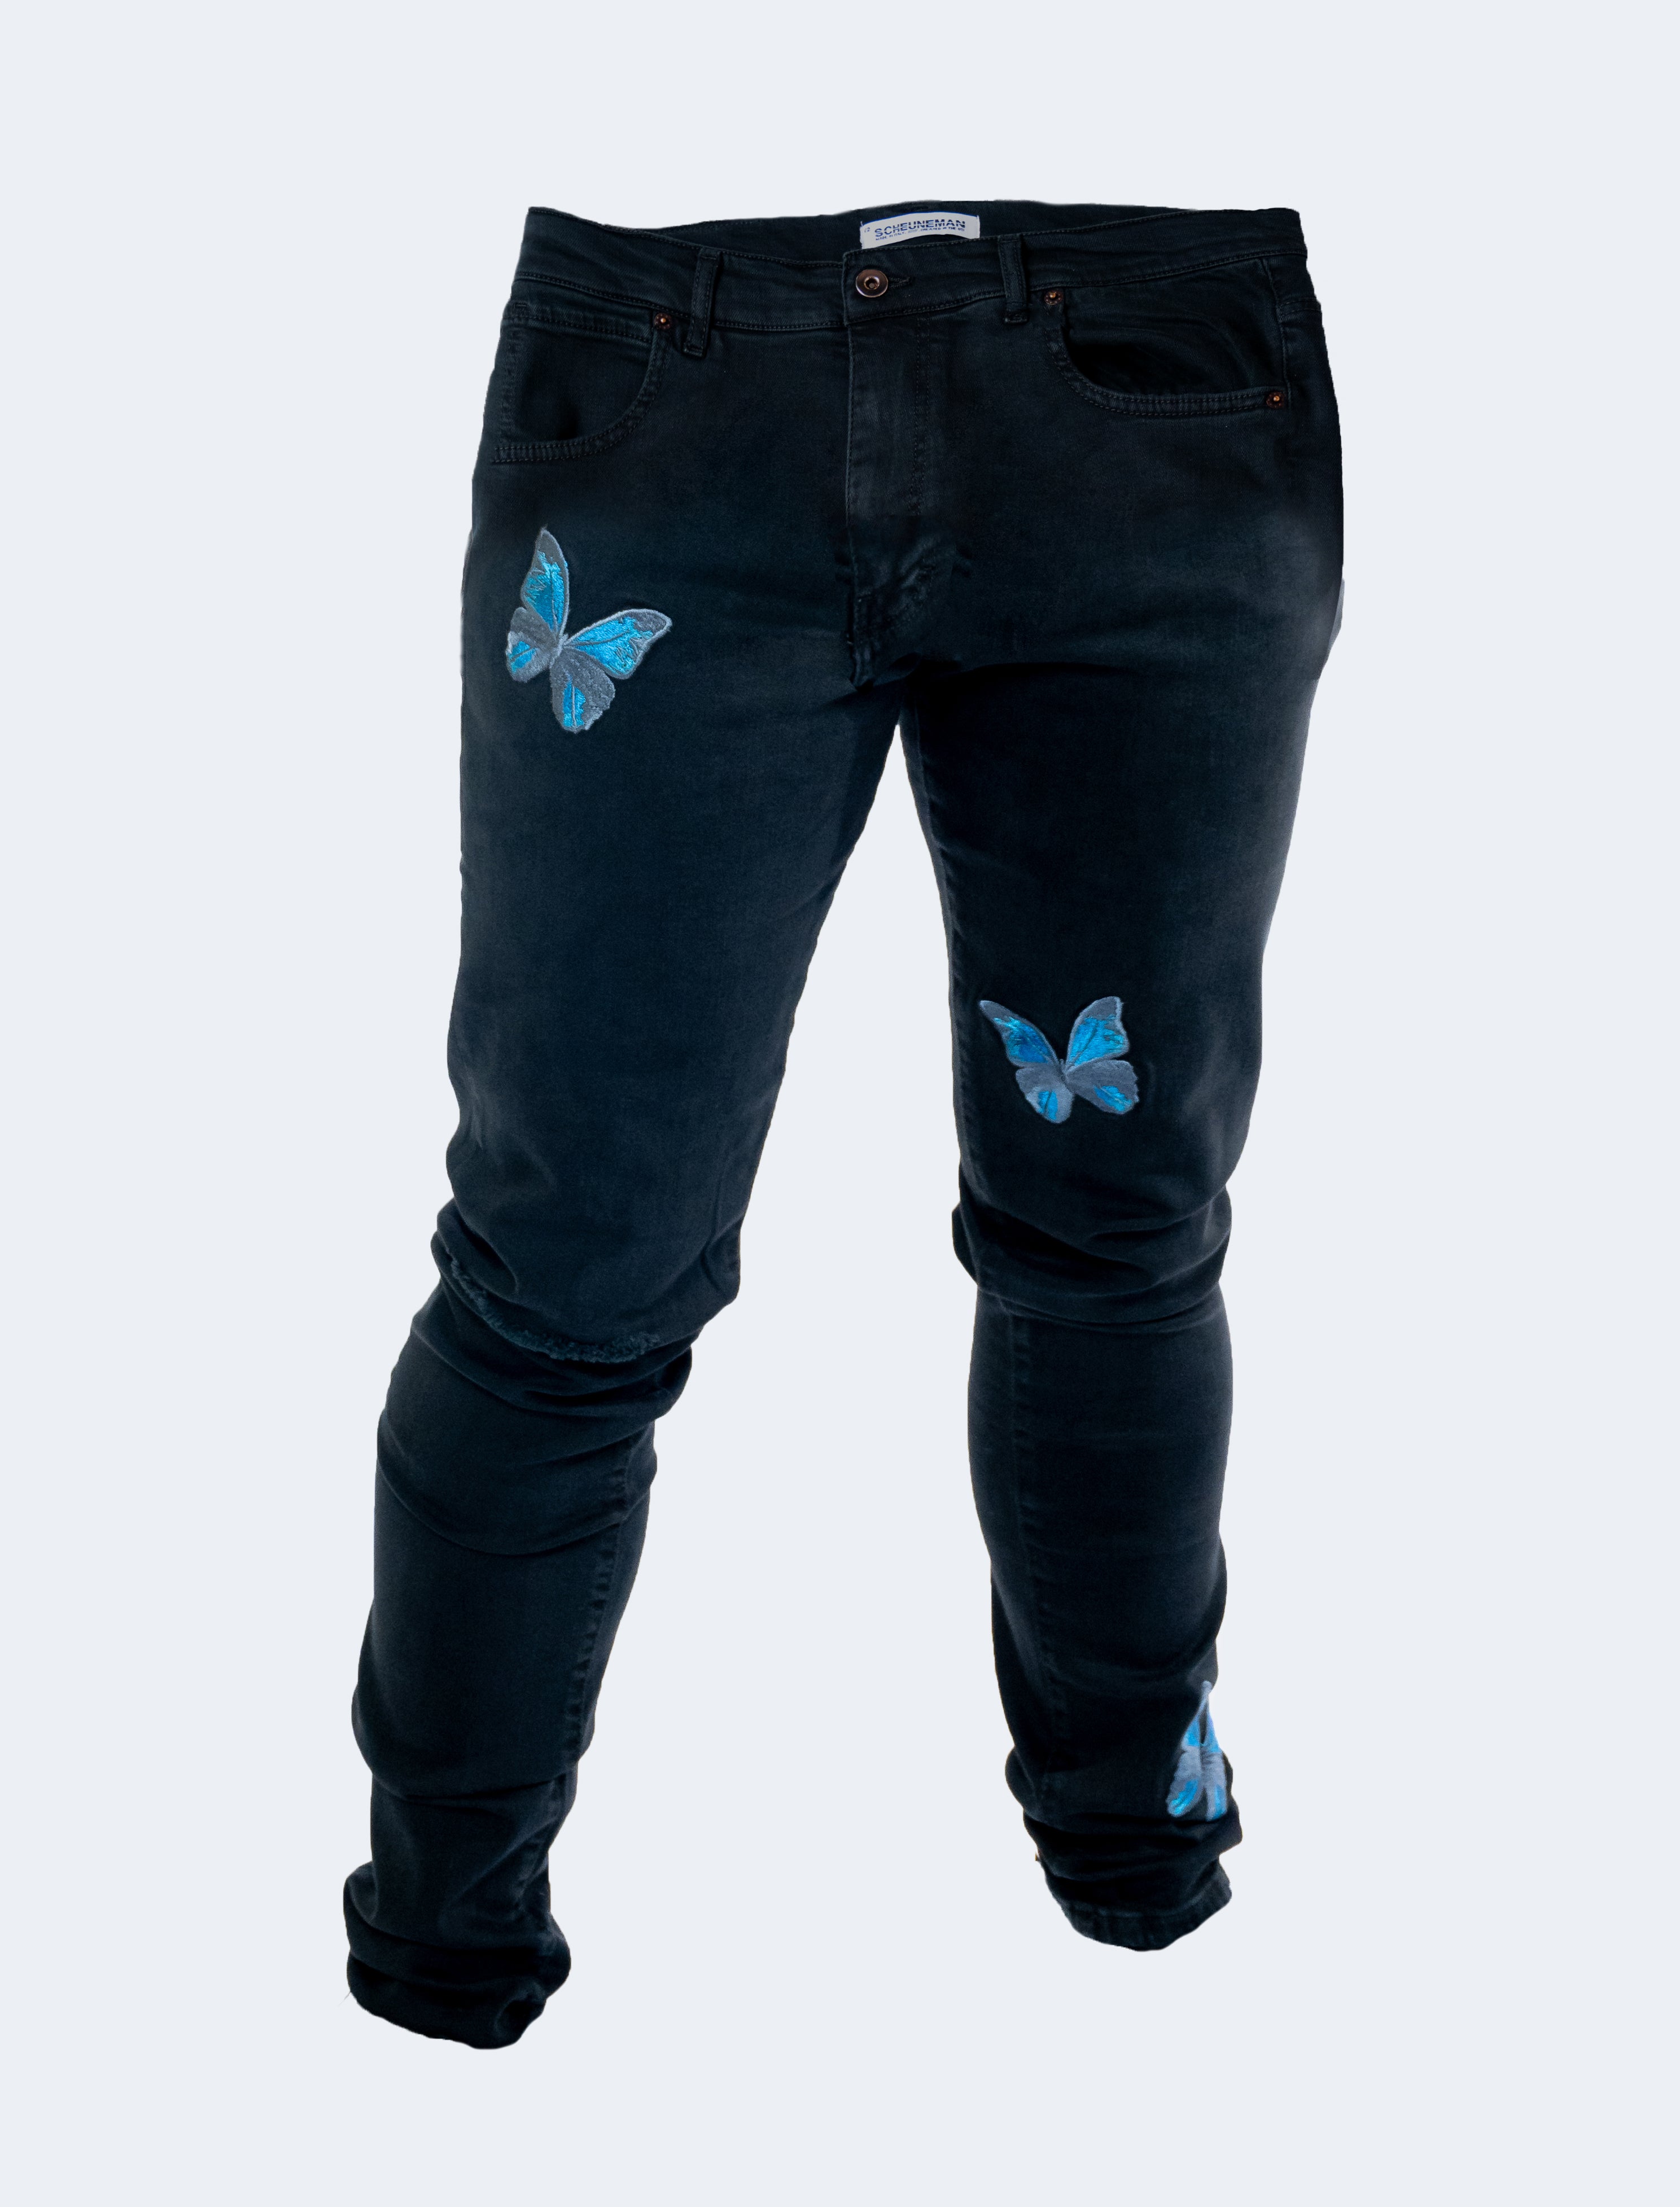 Embroidered Butterfly Jeans